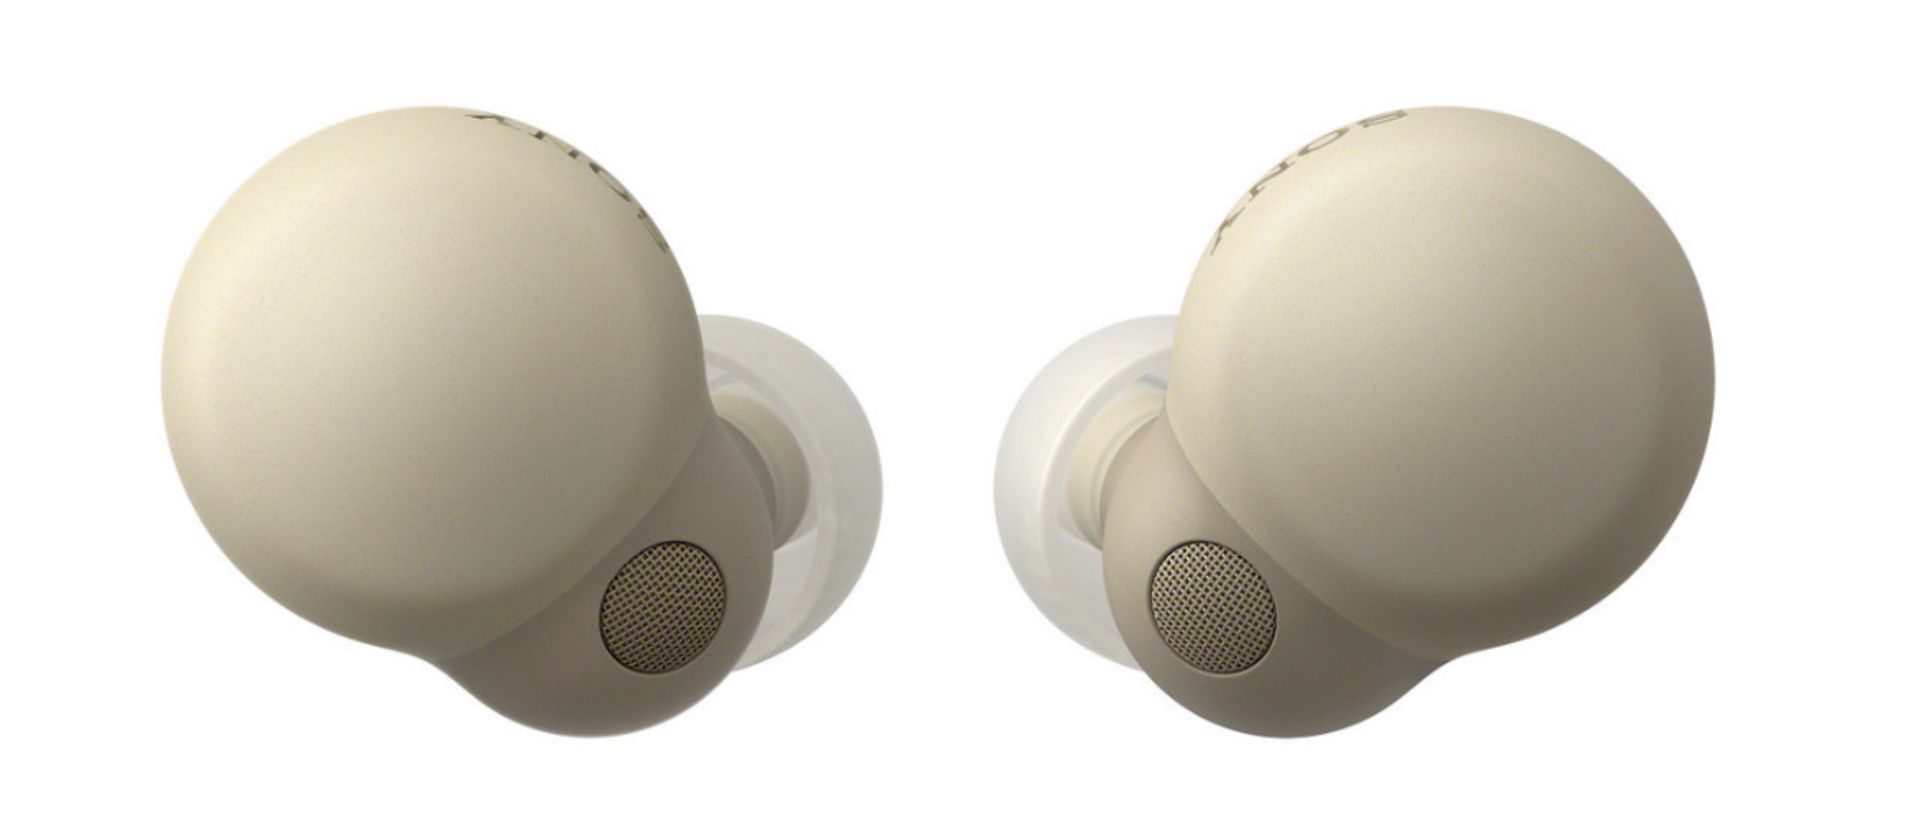 A1 PRODUCT NEW - SONY LINKBUDS S WIRELESS NOISE-CANCELLING, WATER RESISTANT HEADPHONES IN BEIGE - - Bild 2 aus 6